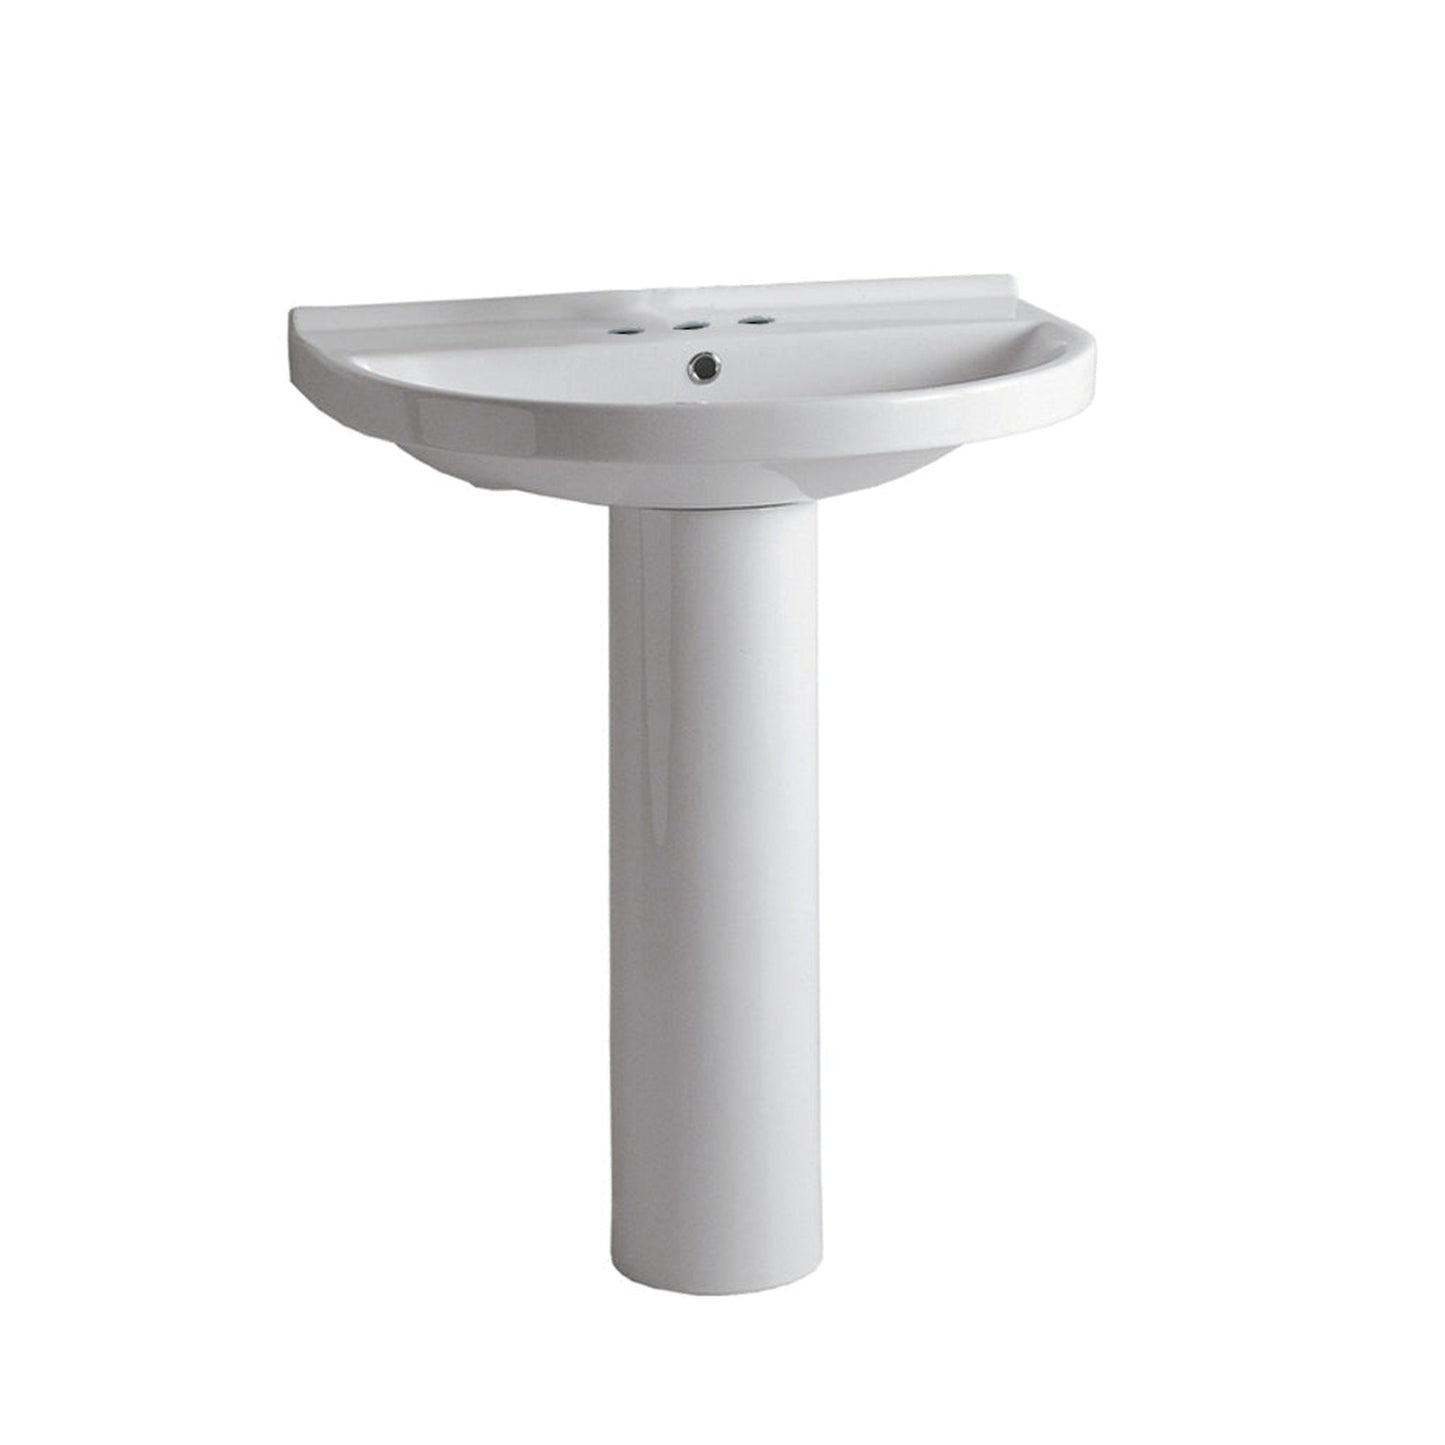 Whitehaus Isabella LU014-LU005-3H White U-Shaped Tubular Pedestal Sink With Widespread Faucet Driliing and Rear Center Drain